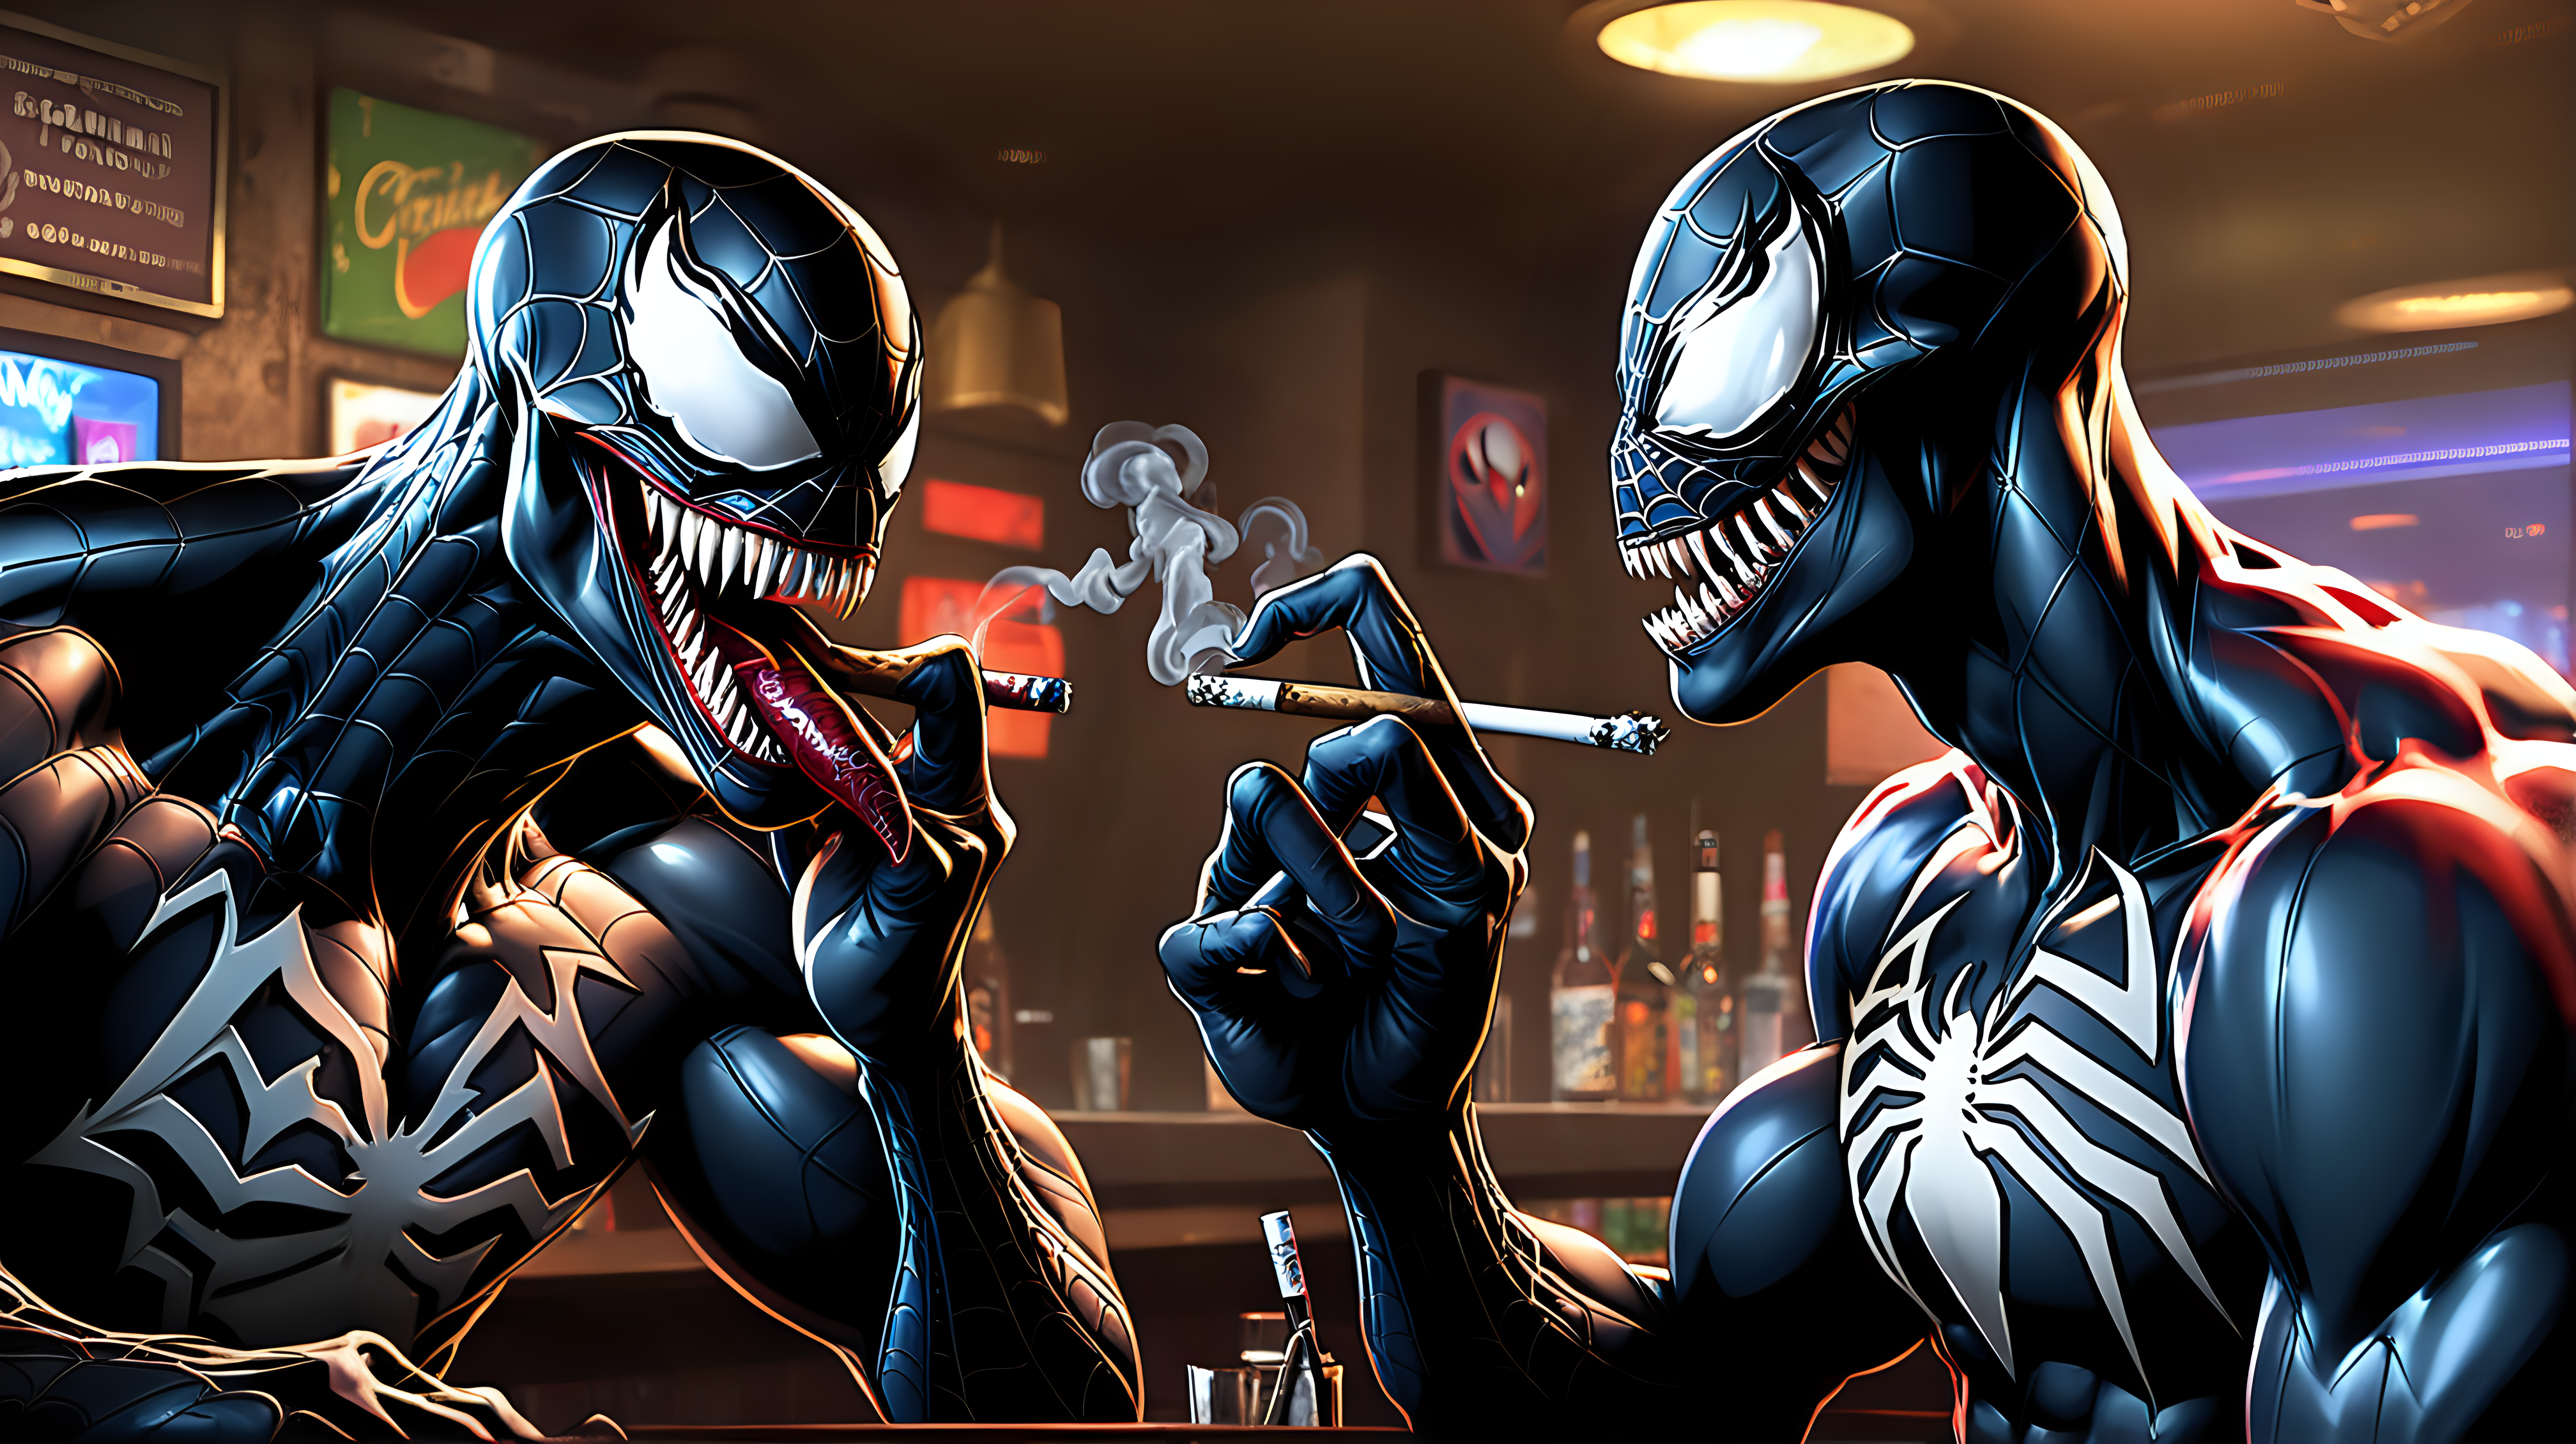 Venom smoking a joint at a bar with